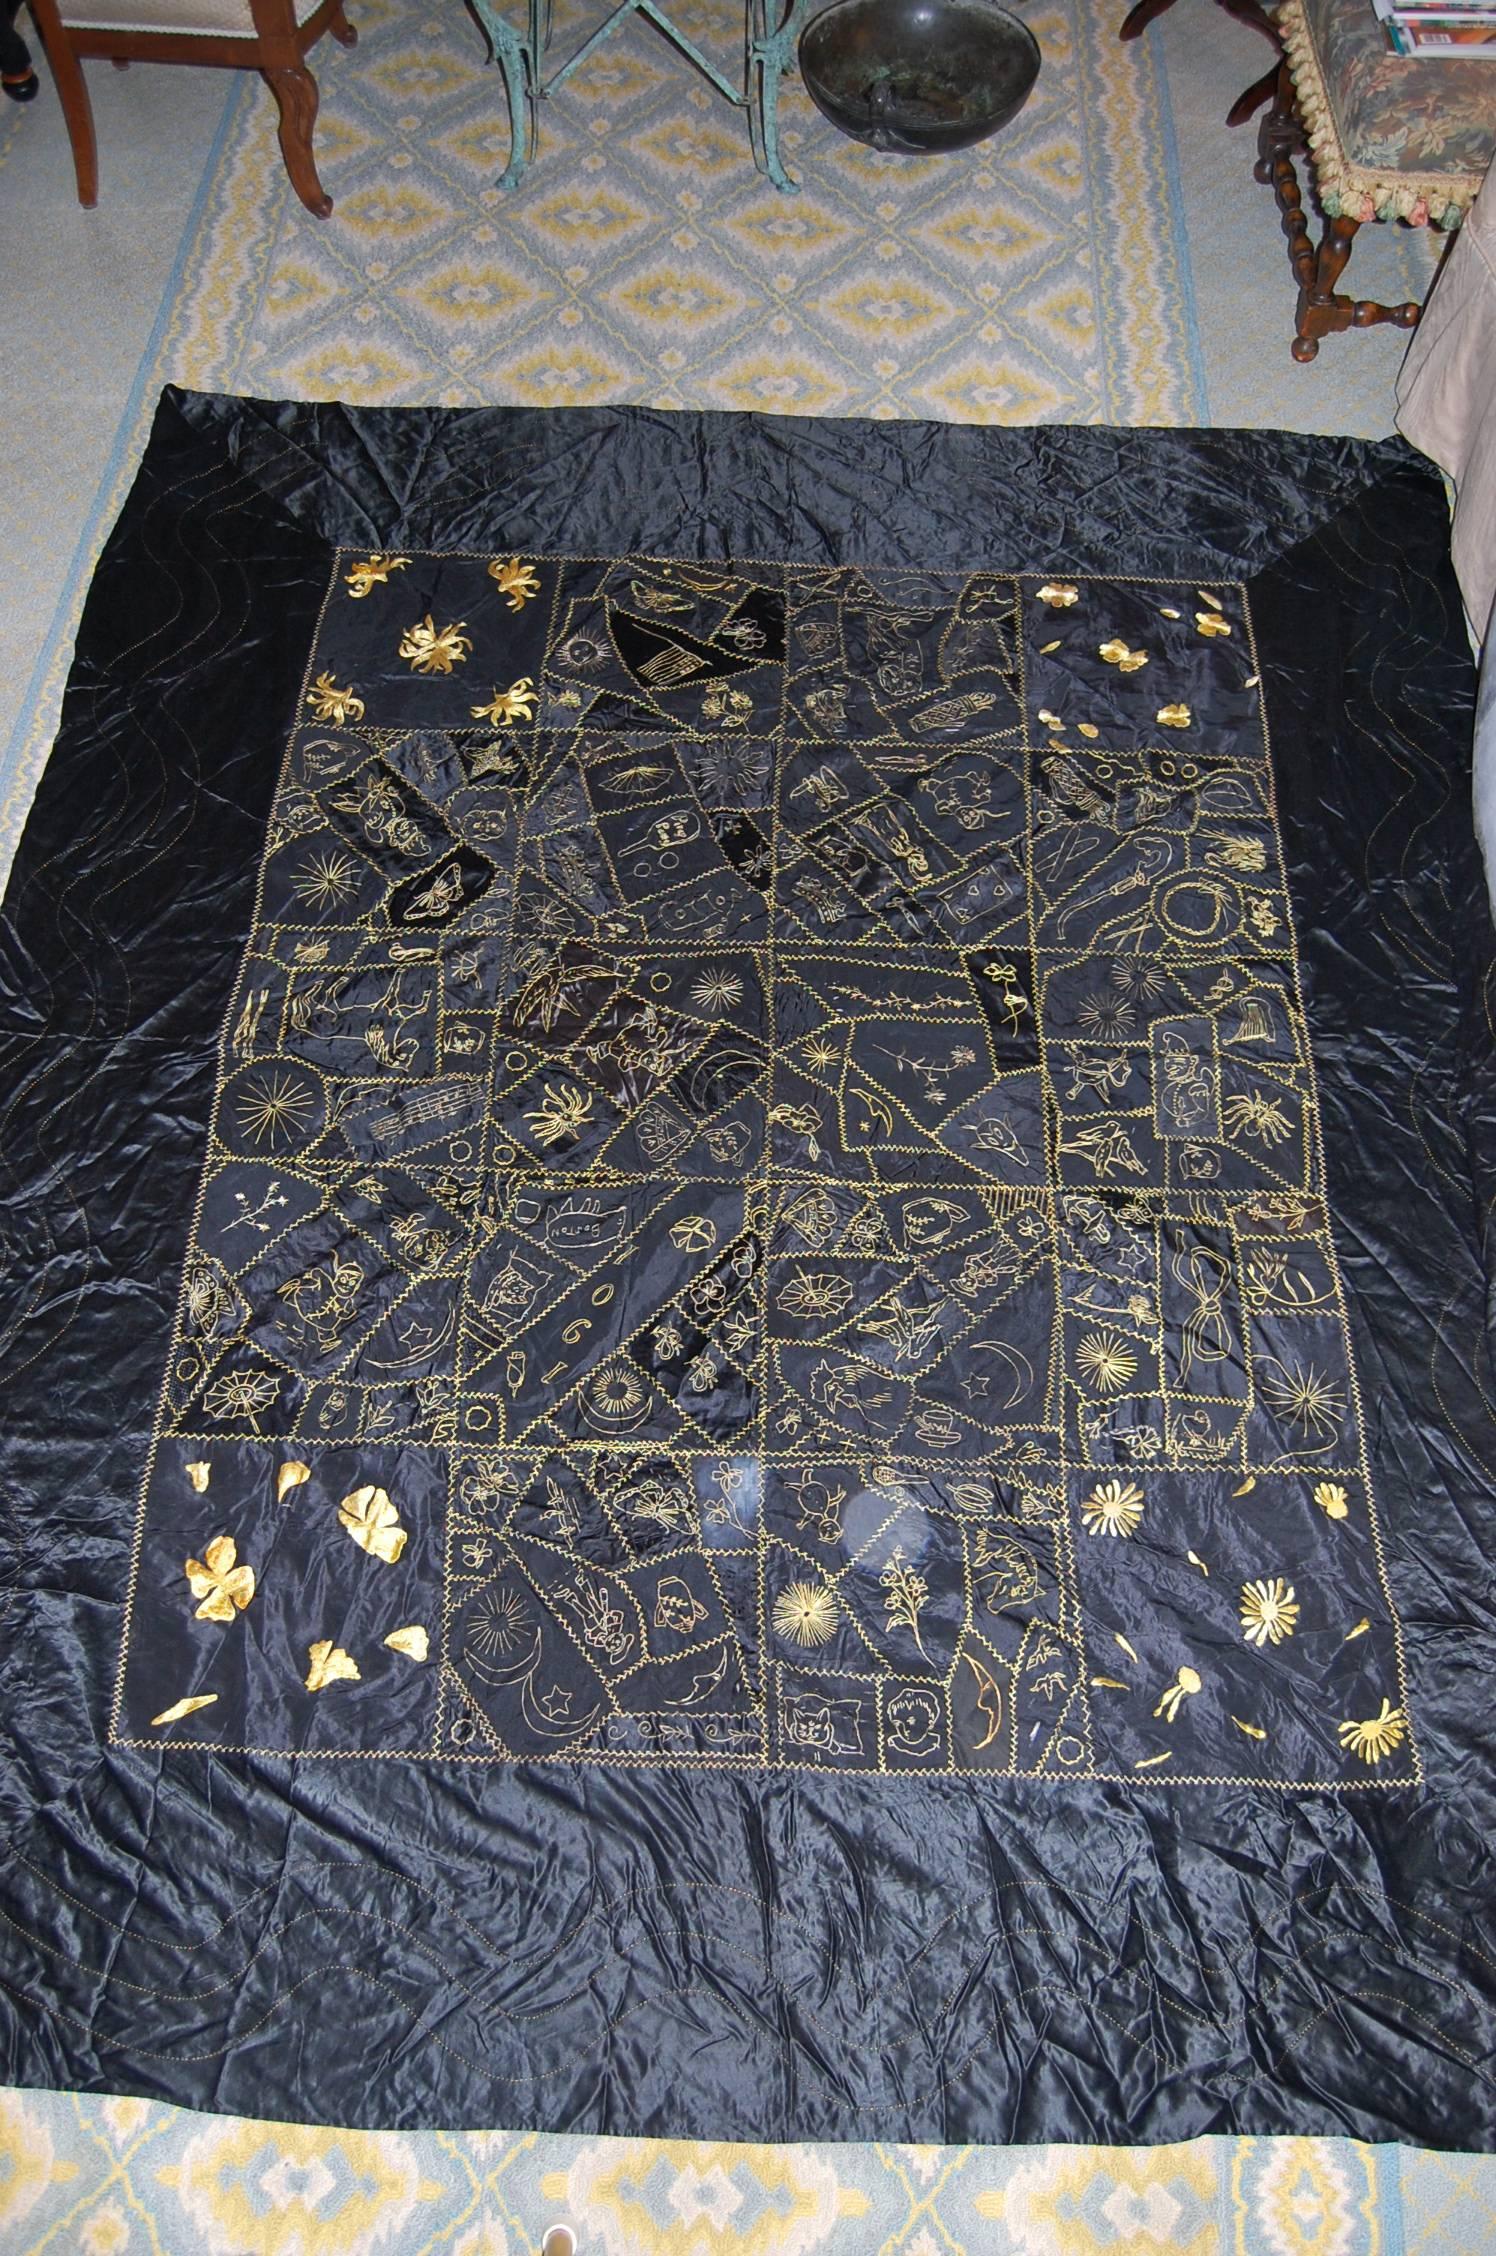 Hand-Crafted New England Silk Quilt with Gold Embroidery in Excellent Condition, 1901, Boston